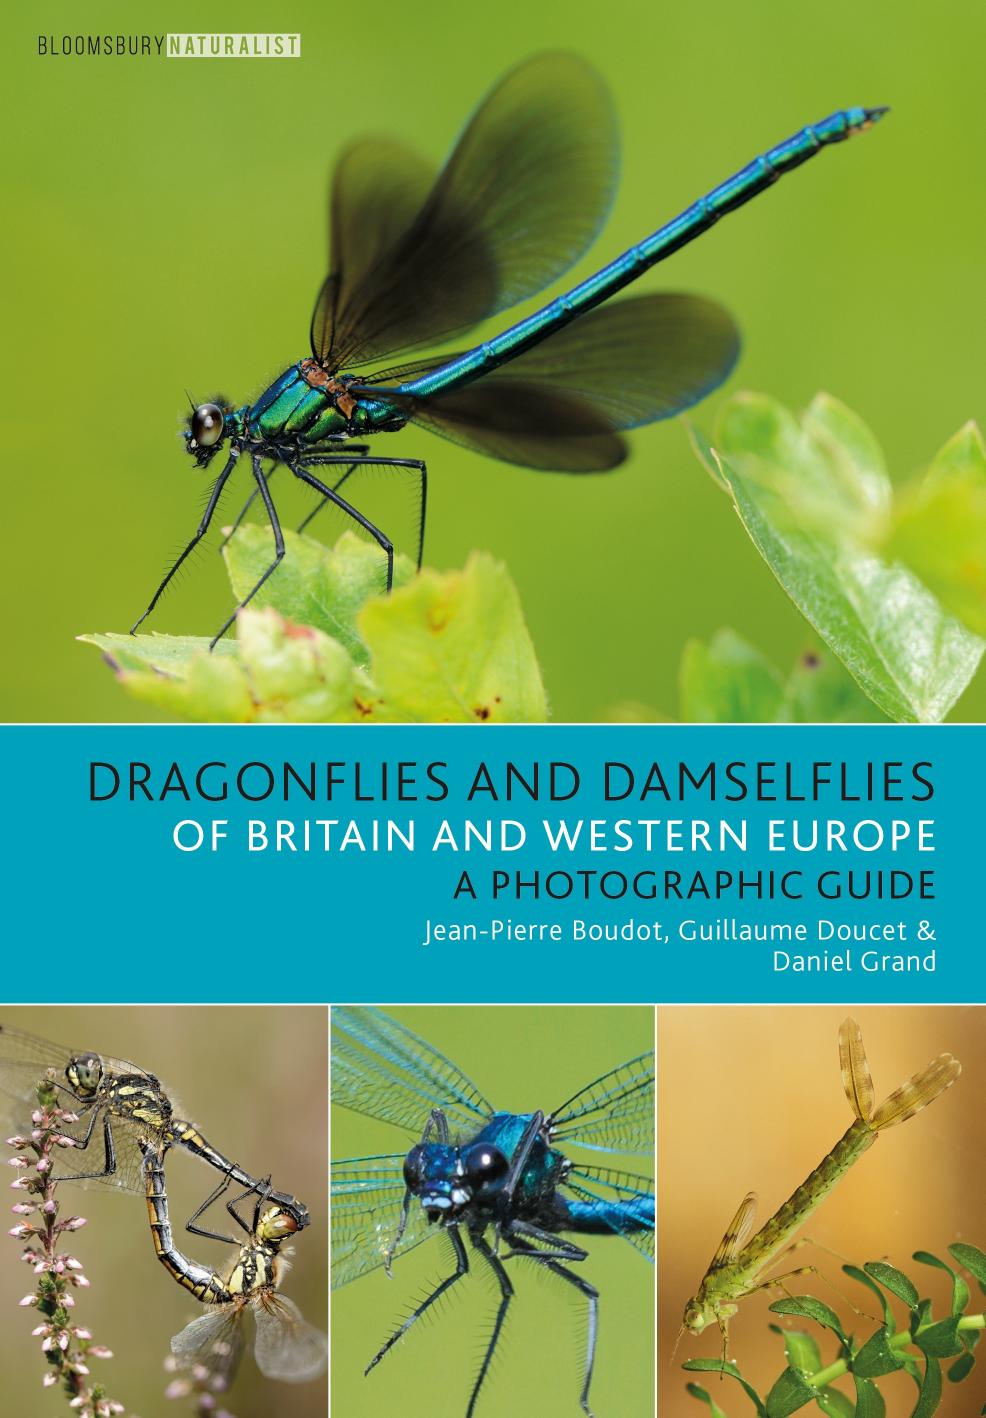 Dragonflies and Damselflies of Britain and Western Europe by Jean-Pierre Boudot Guillaume Doucet and Daniel Grand